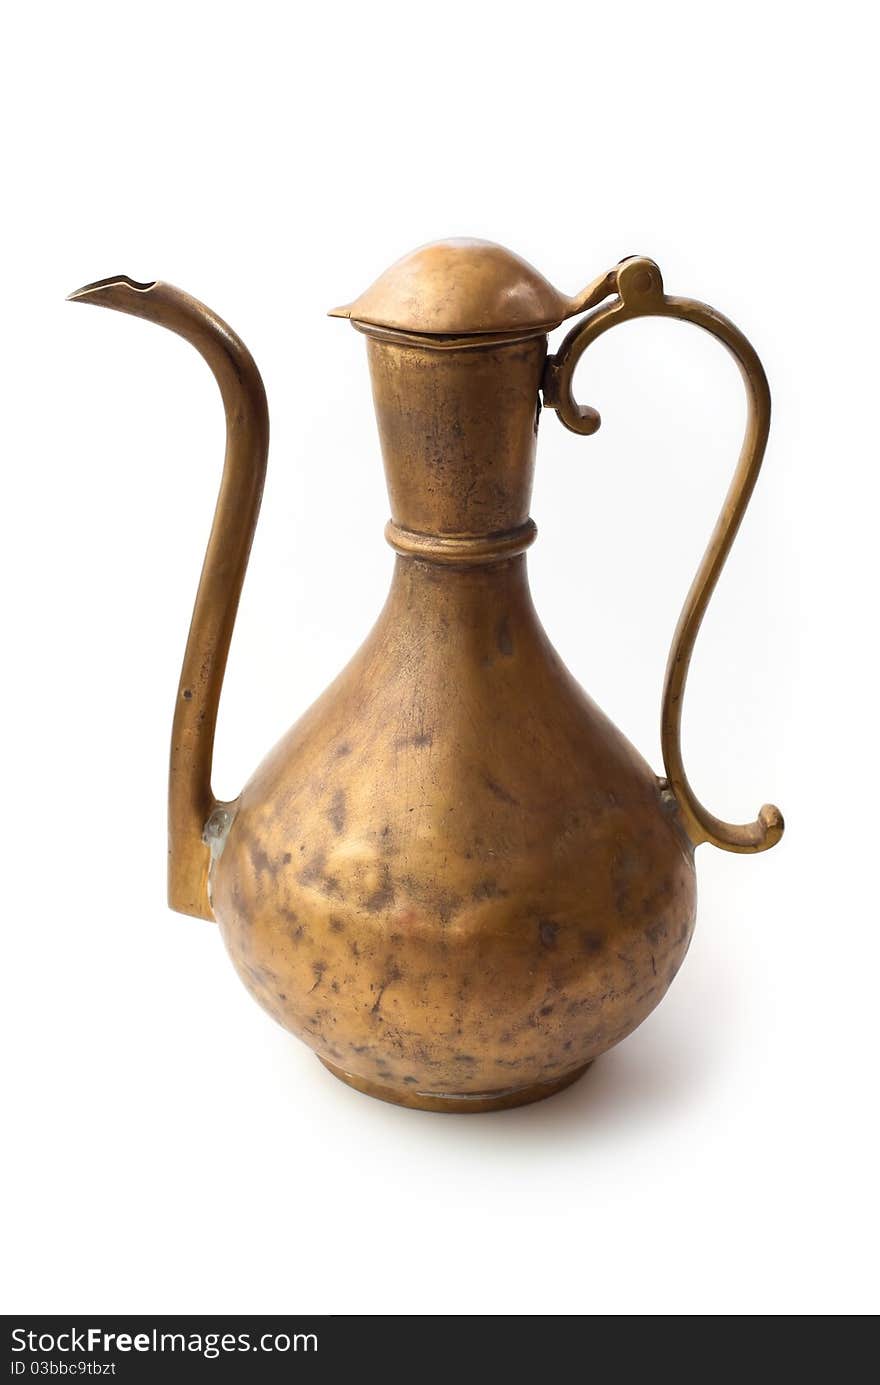 Old vintage vessel with long spout, isolated